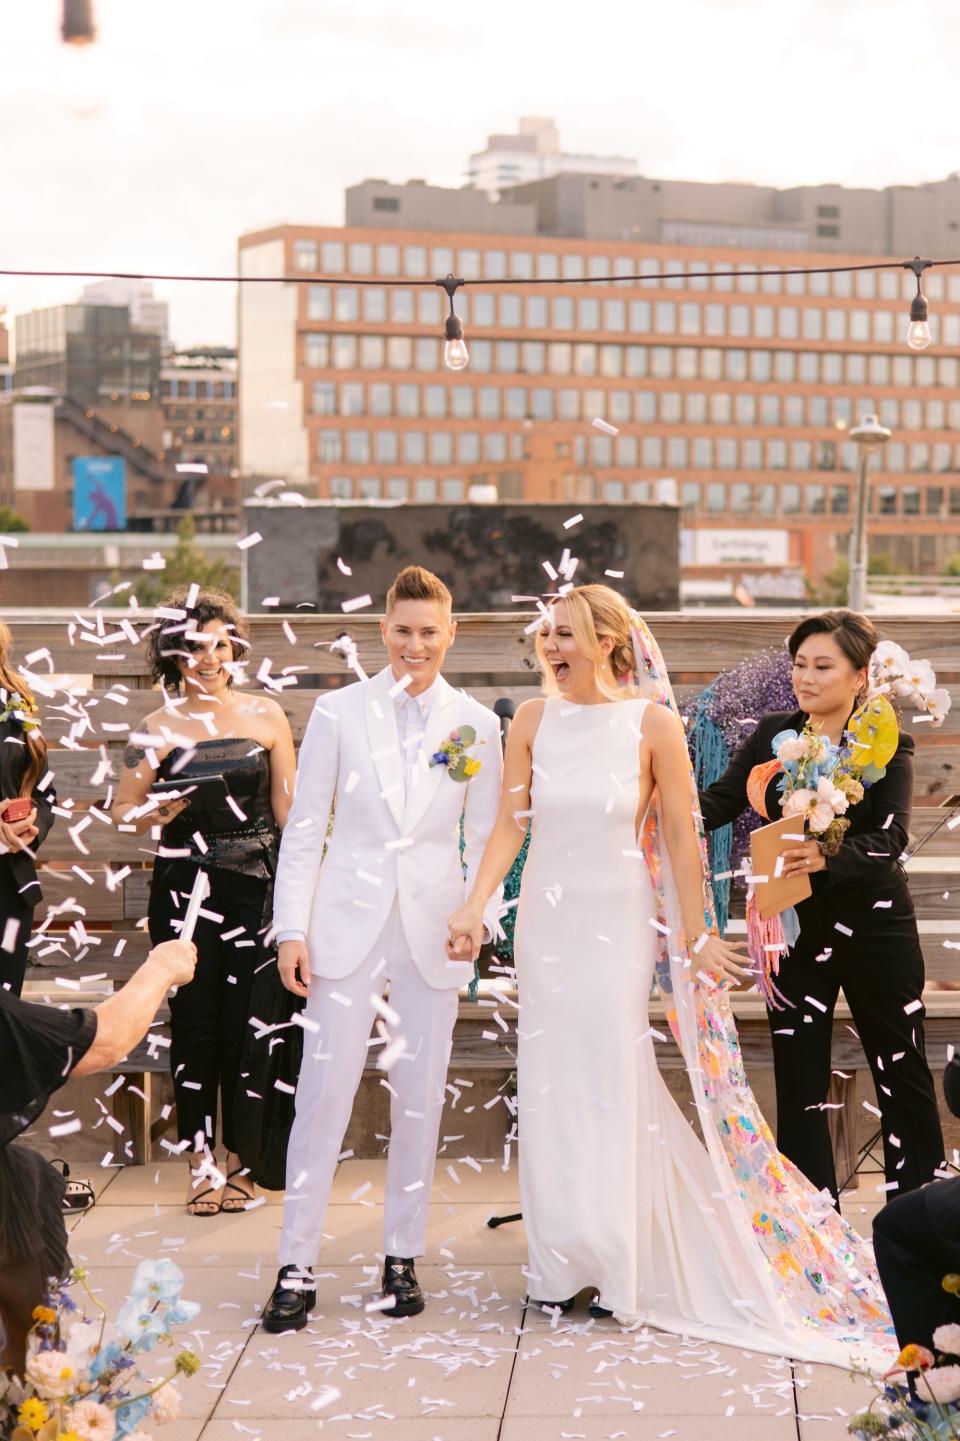 A bride in a white suit and a bride in a white dress and rainbow veil hold hands as confetti explodes around them during their wedding ceremony.